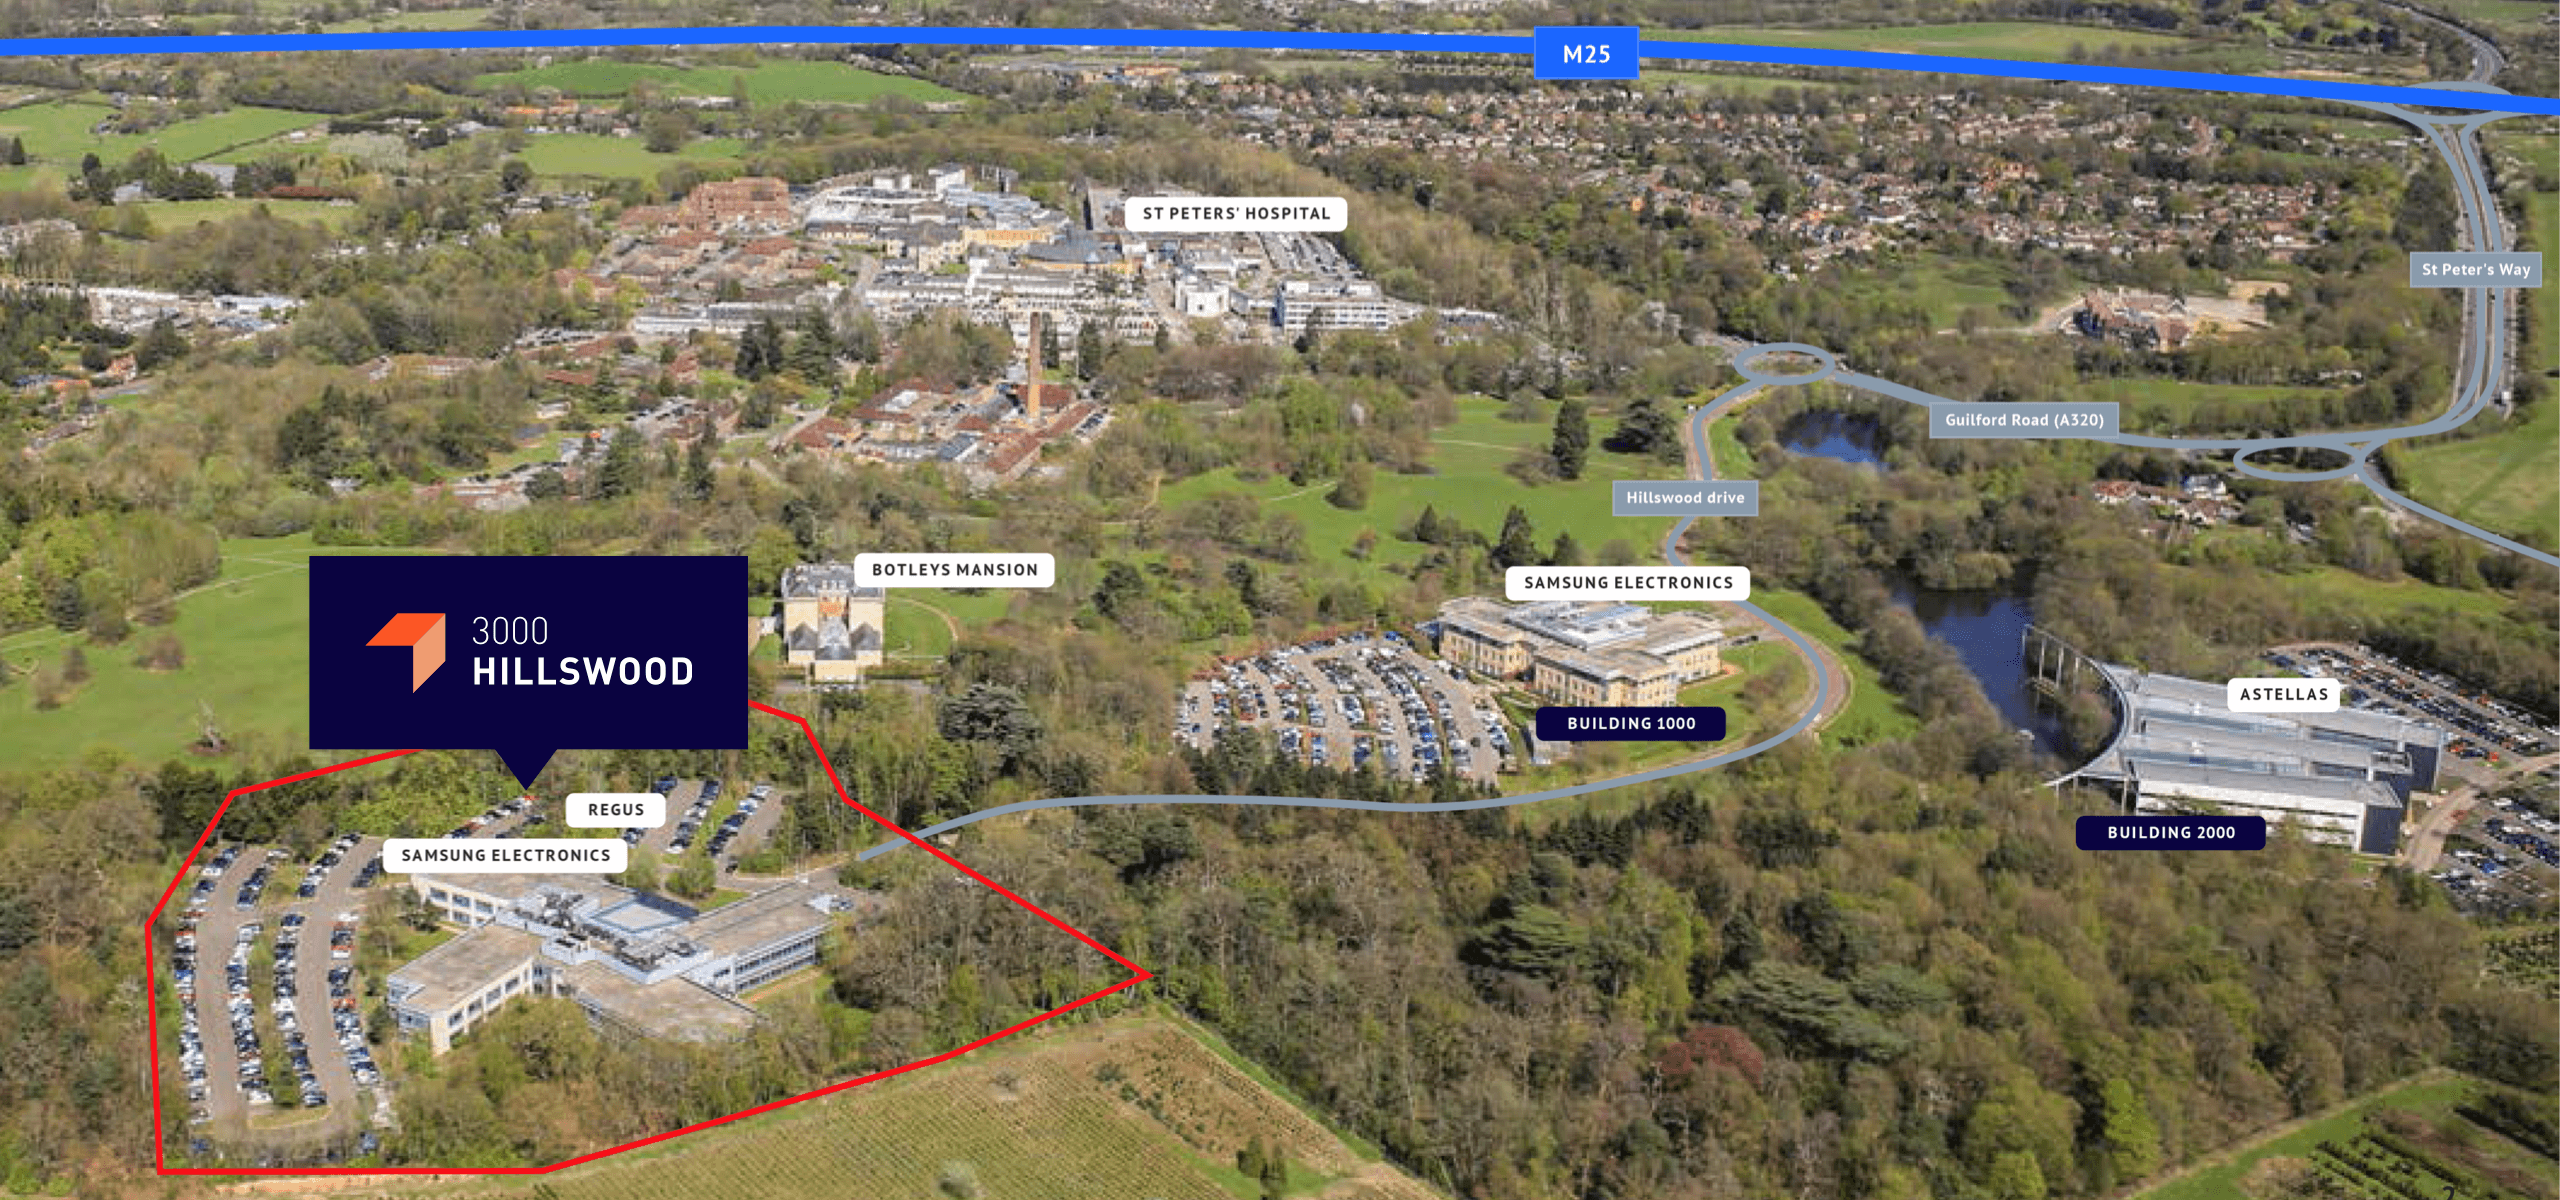 Aerial view map of 3000 Hillswood Business Park, Chertsey